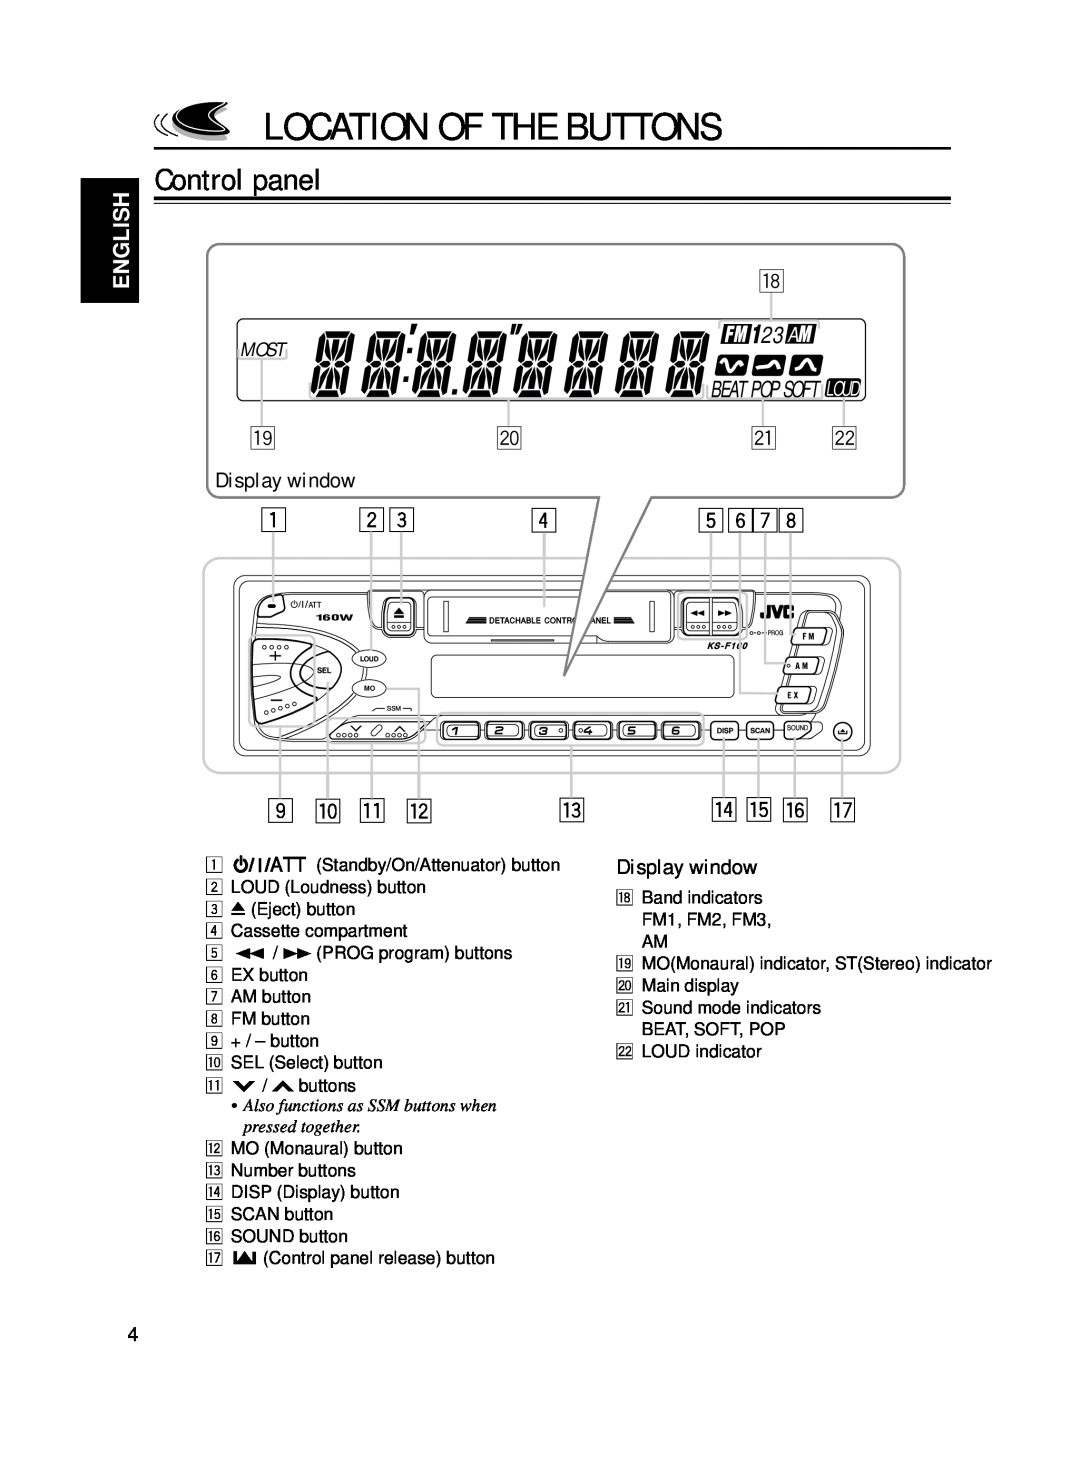 JVC KS-F160 manual Location Of The Buttons, Control panel, Display window, p q w, r t y u, 23 A, English, Most, Pty Tp 